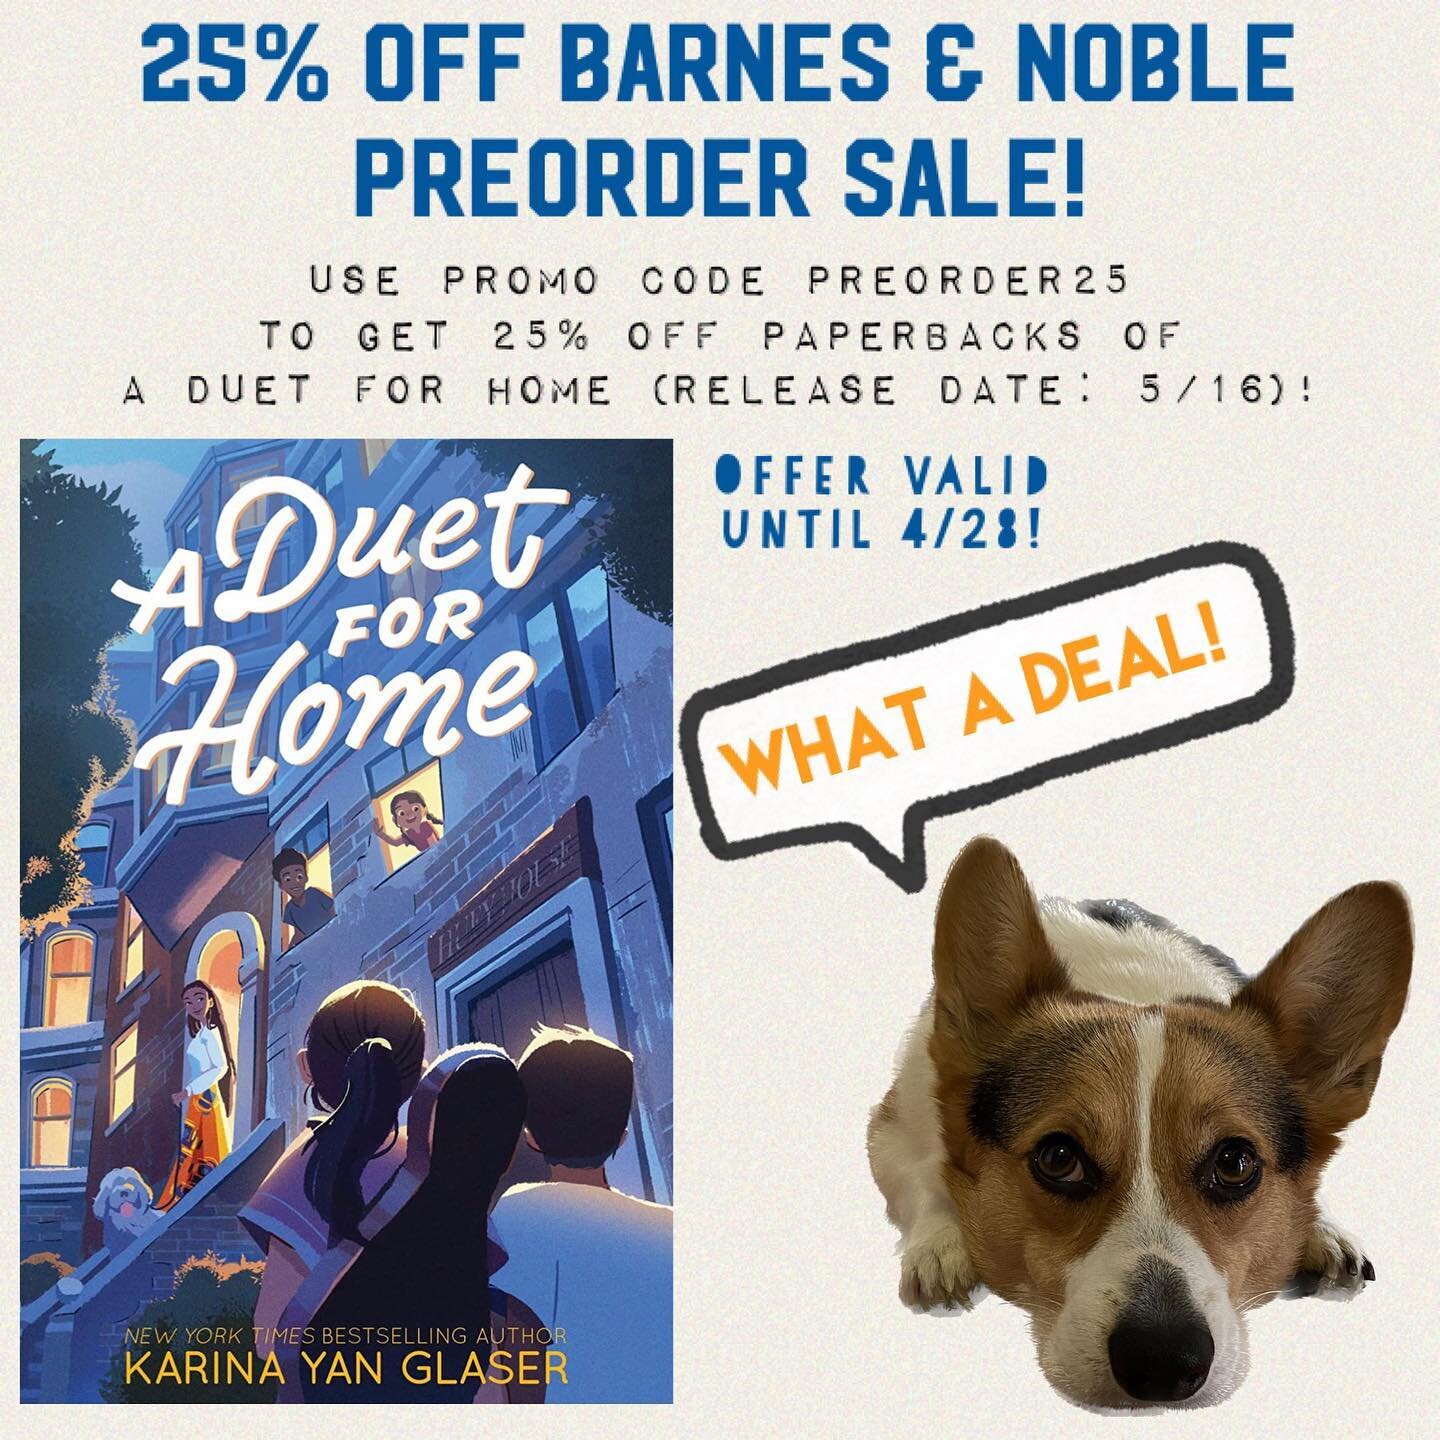 Barnes and Noble is holding it&rsquo;s 25% off preorder sale, and what great timing because 🎶A DUET FOR HOME🎶 paperbacks are coming next month! Lalo thinks this is a great deal! 👍🏼 Use promo code PREORDER25 when you check out. Link in profile!